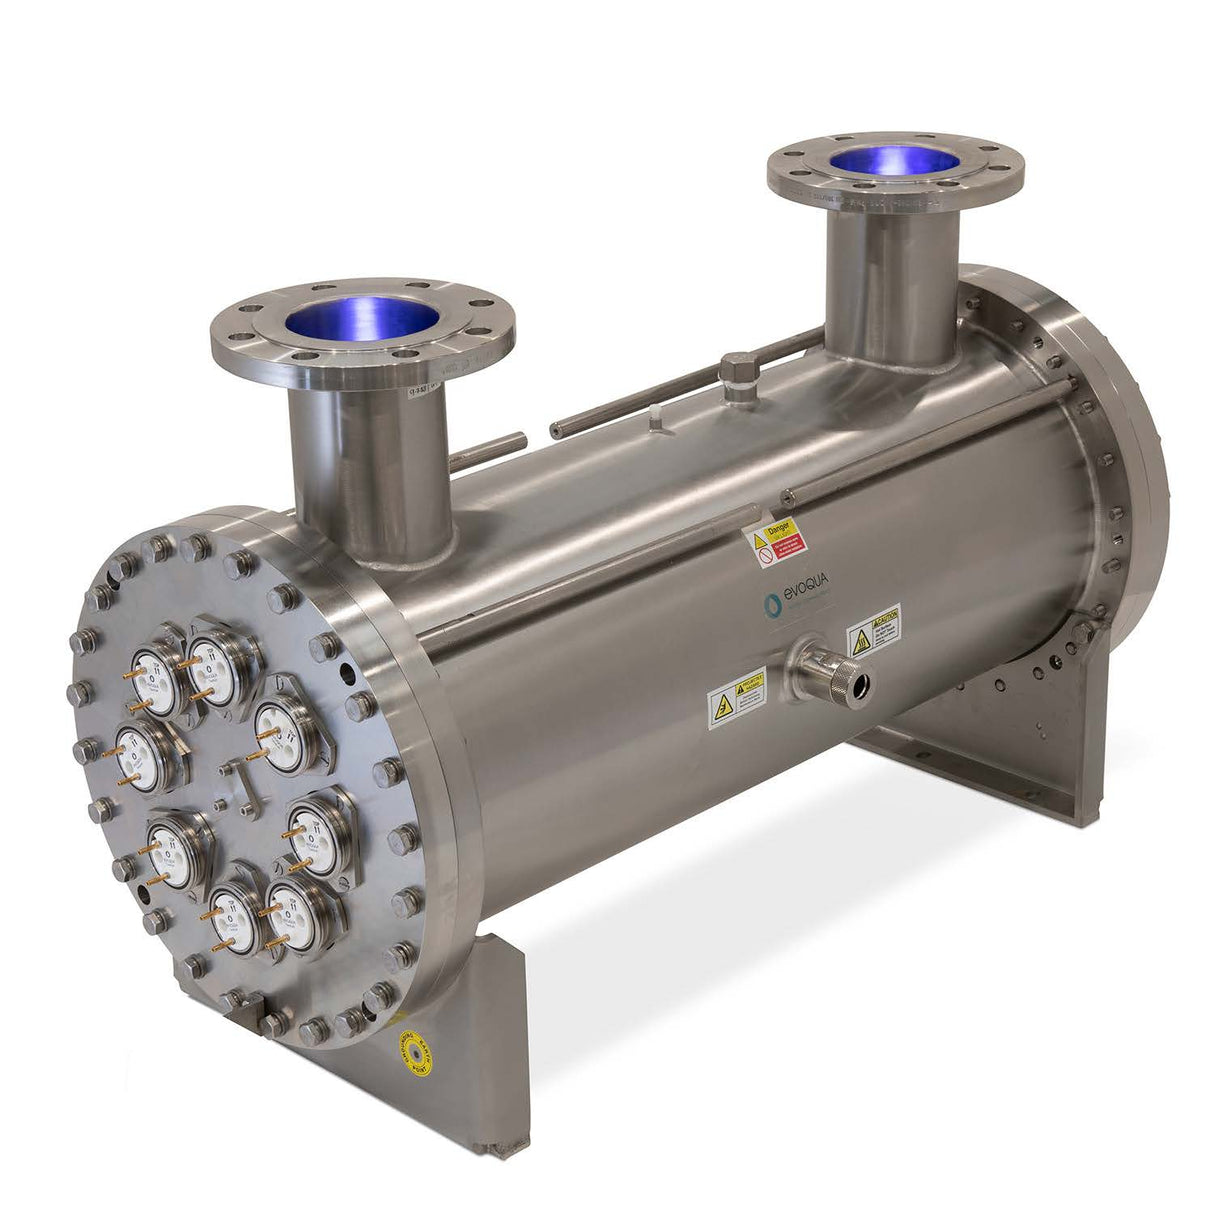 ATG™ UV VXM Industrial Appliations Disinfection Systems